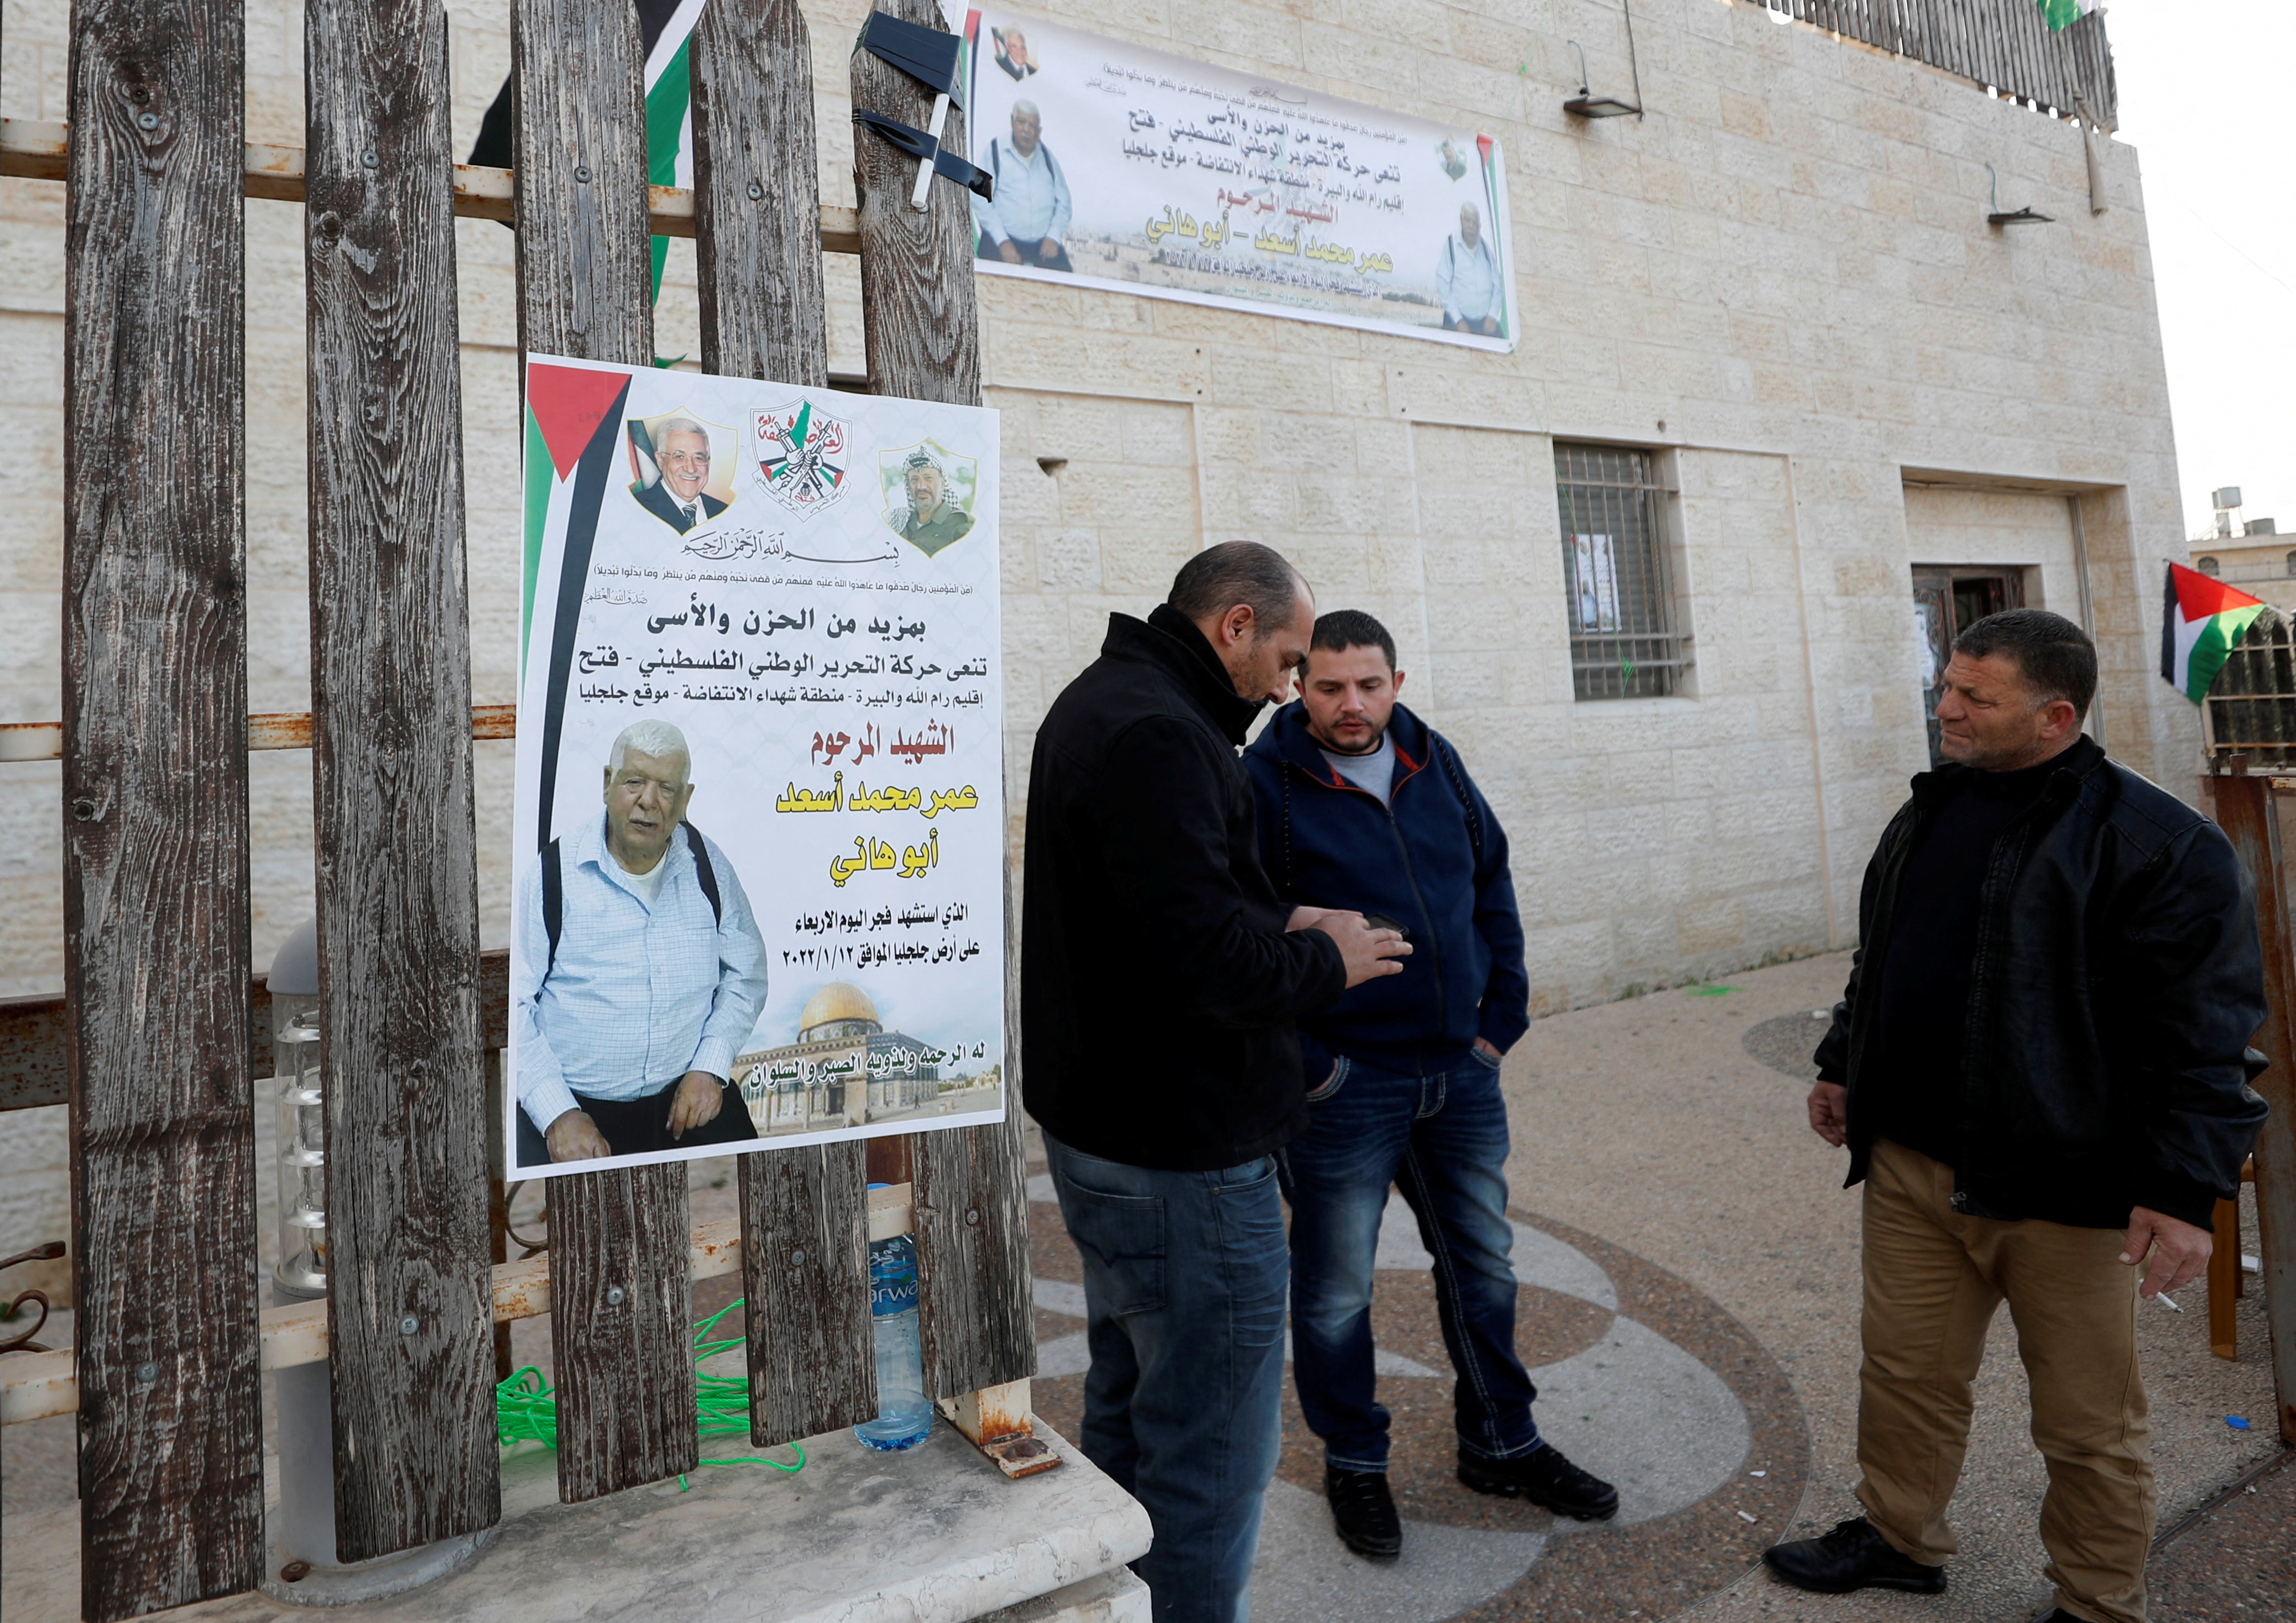 Men stand next to a poster of Palestinian Omar Abdalmajeed As'ad, 80, in Jiljilya village in the Israeli-occupied West Bank January 12, 2022. REUTERS/Mohamad Torokman